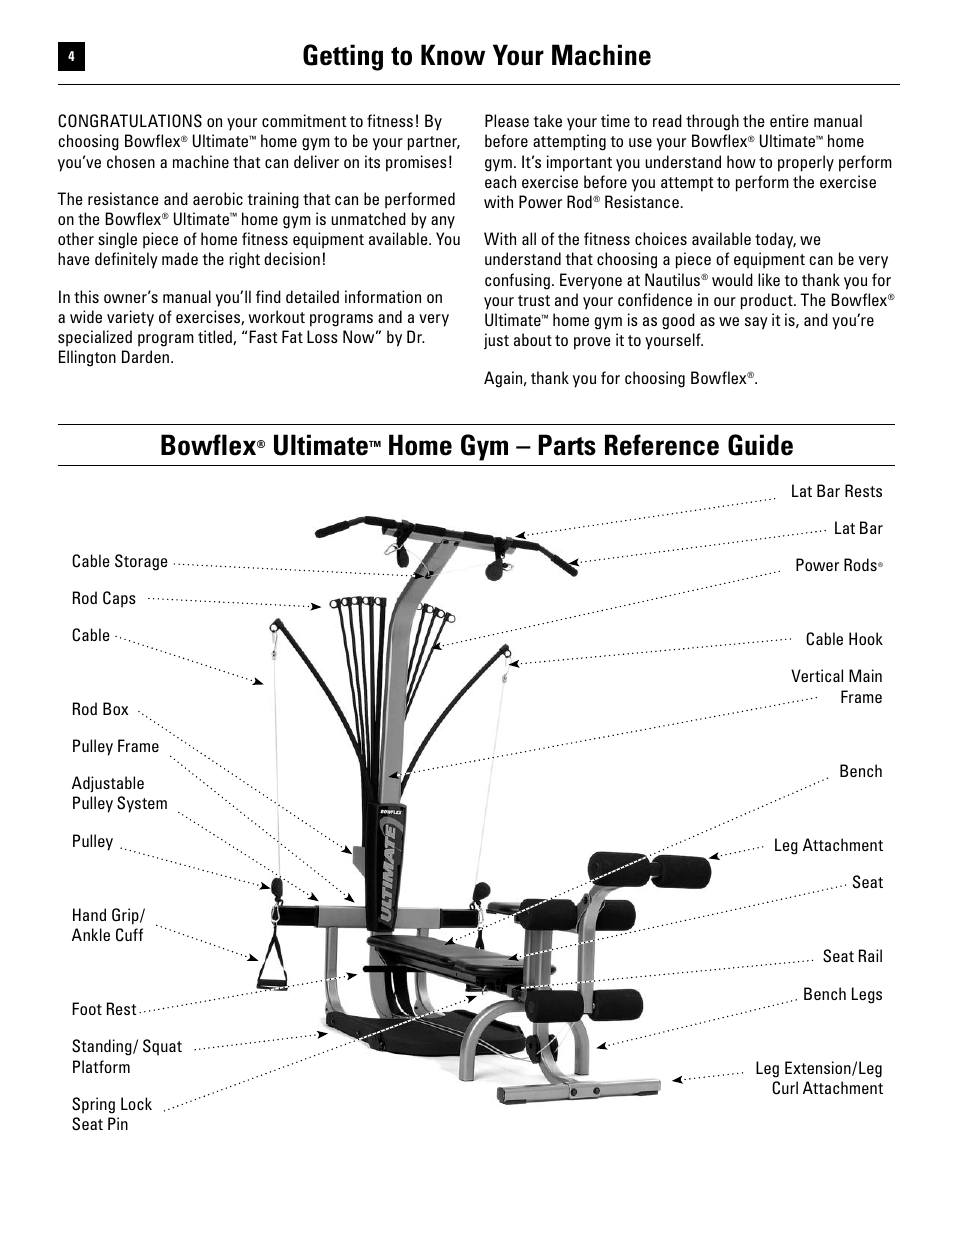 Bowflex, Ultimate, Home gym – parts reference guide | Getting to know your machine | Bowflex Ultimate User Manual | Page 4 / 110